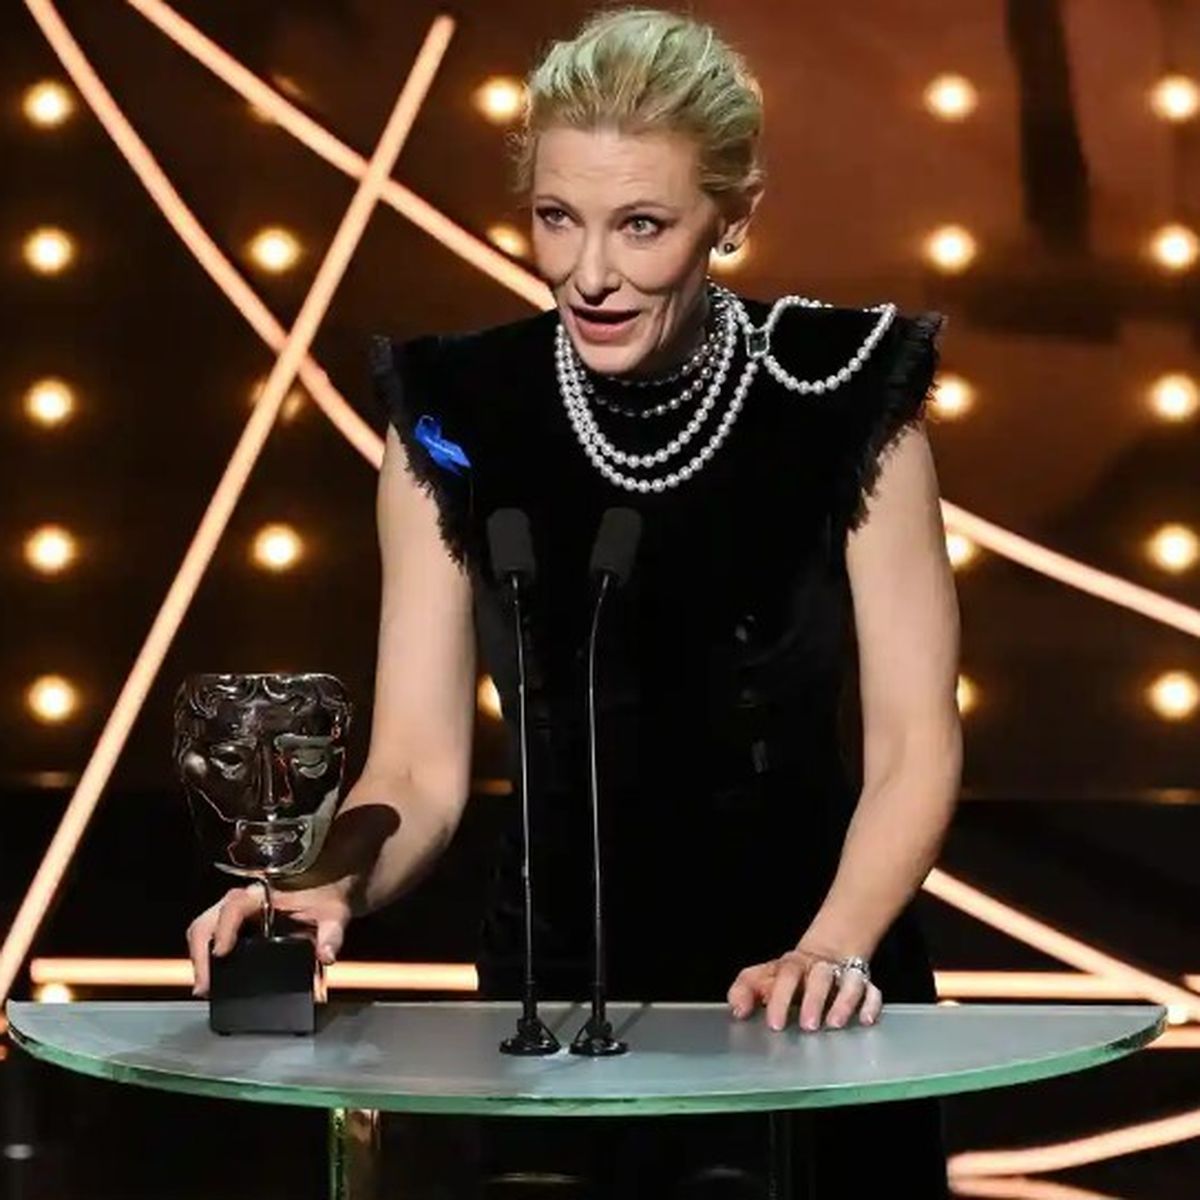 What Cate Blanchett should say if she wins the Oscar